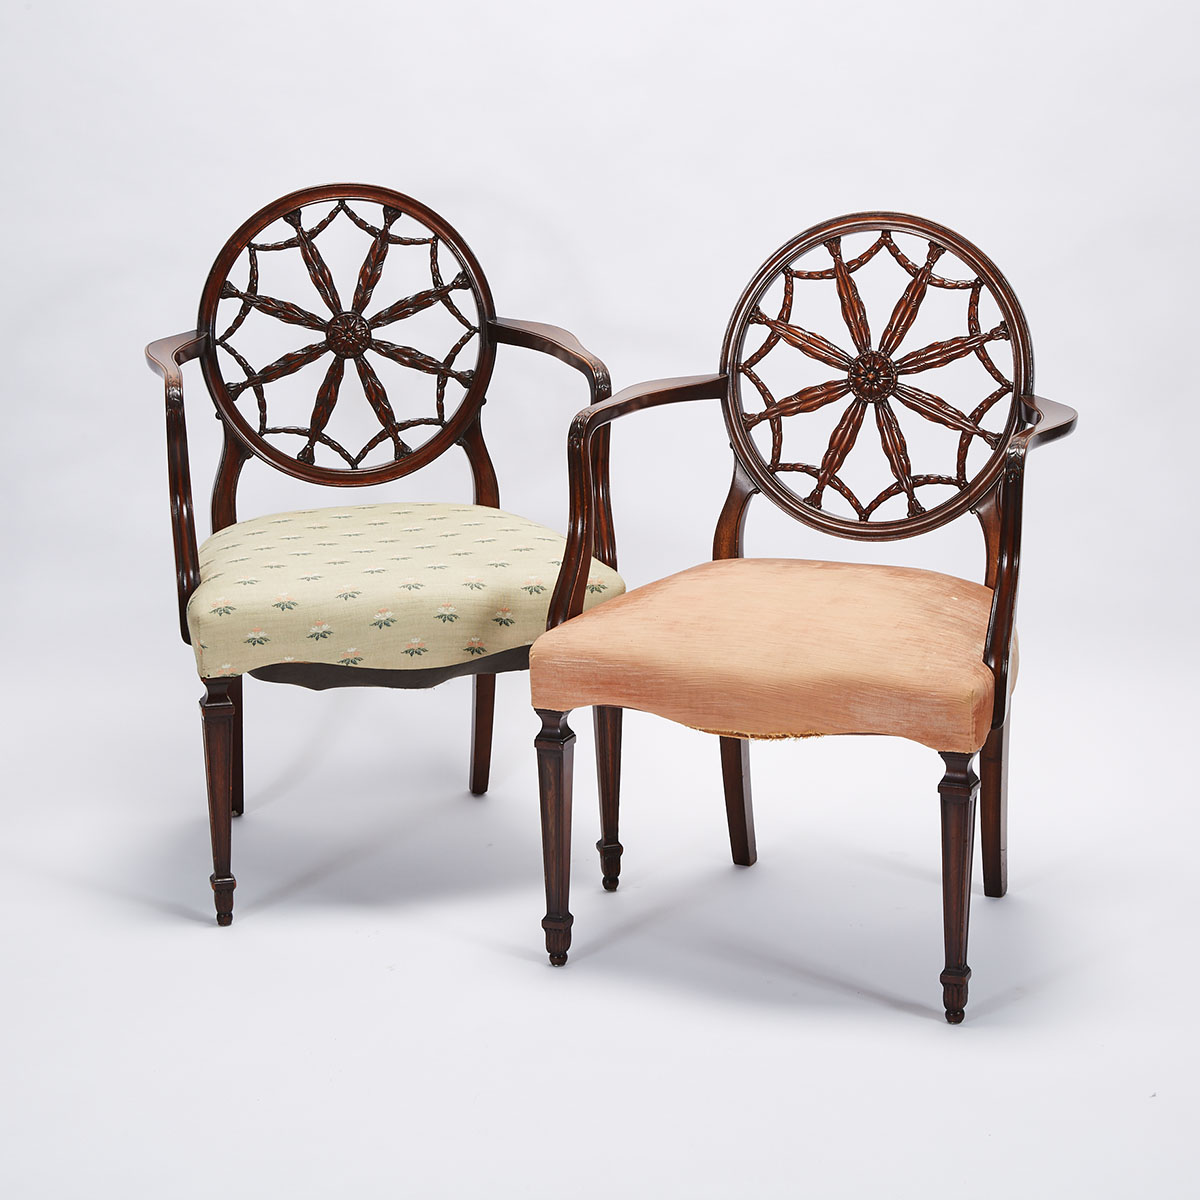 Pair of George III Mahogany Wheel Back Open Armchairs, late 18th century